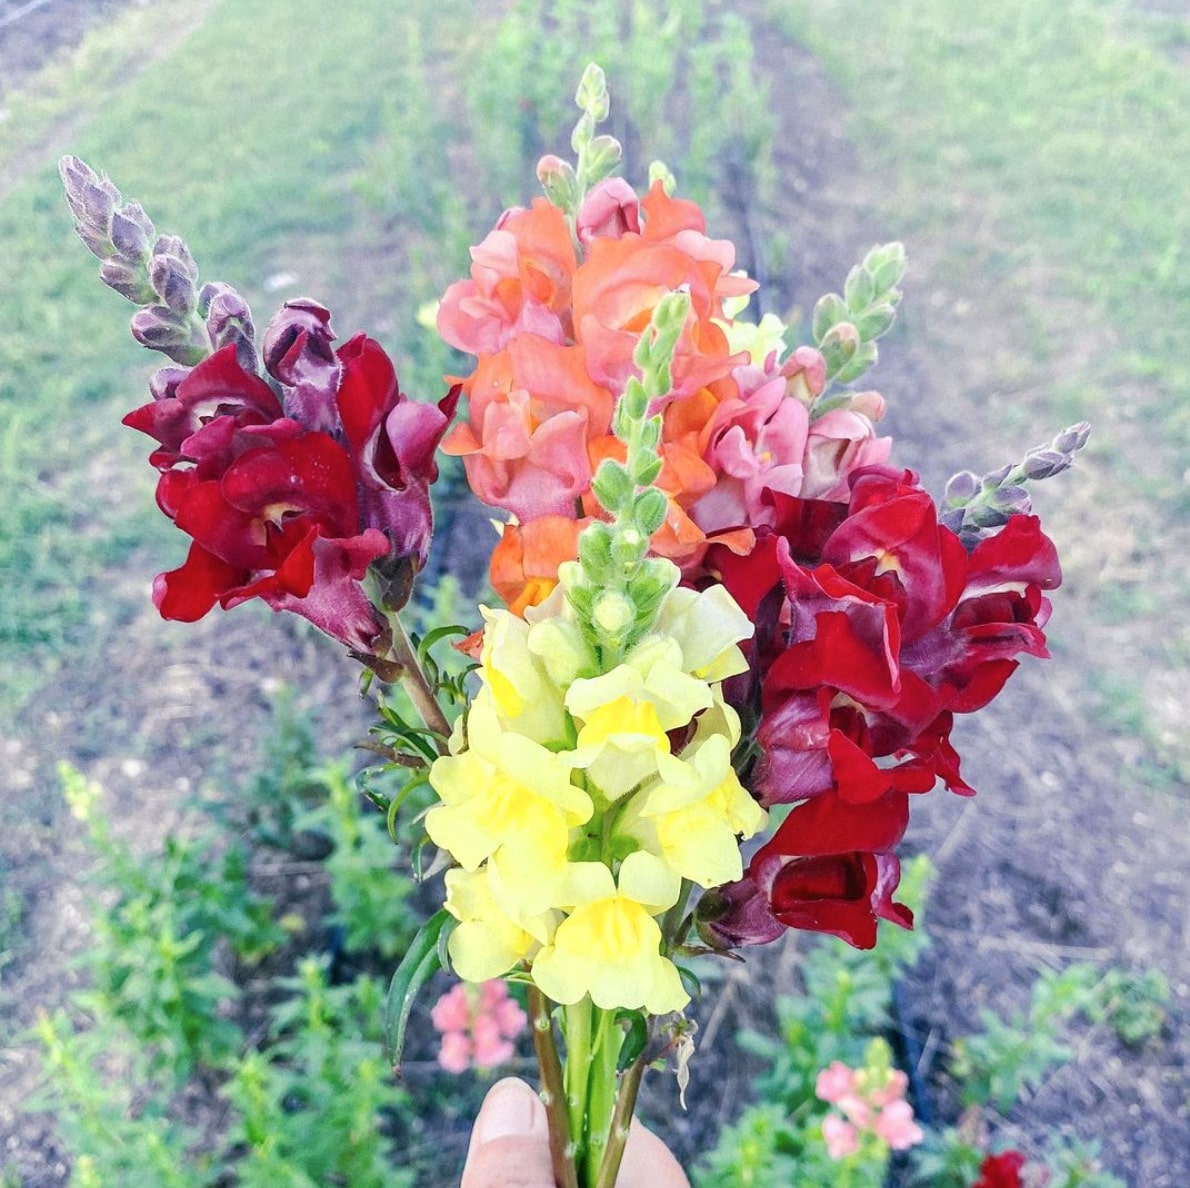 Snapdragon Flower with variety of colors